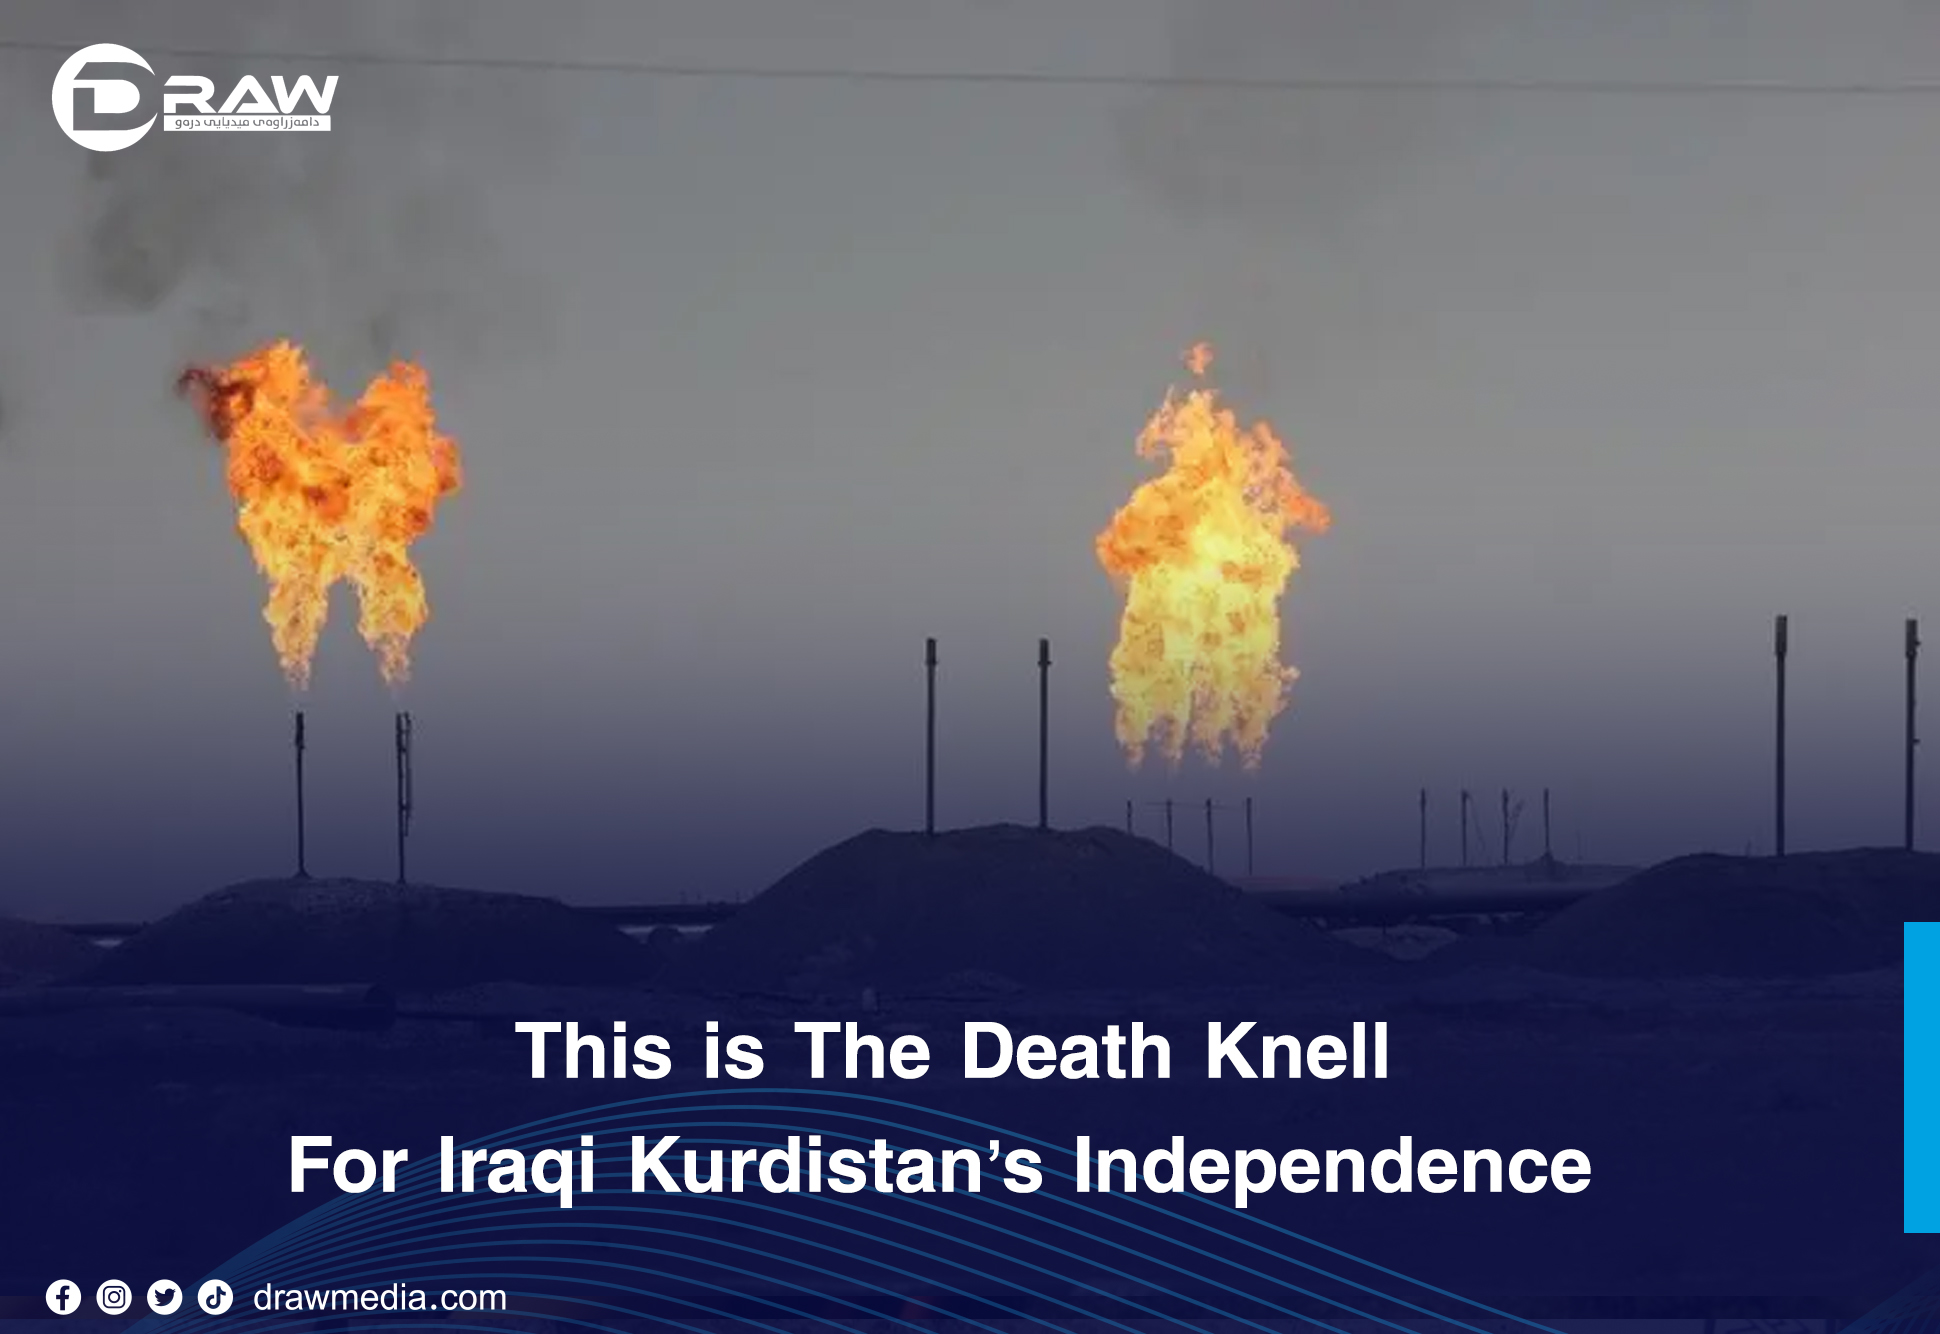 DrawMedia.net / This is The Death Knell For Iraqi Kurdistan’s Independence